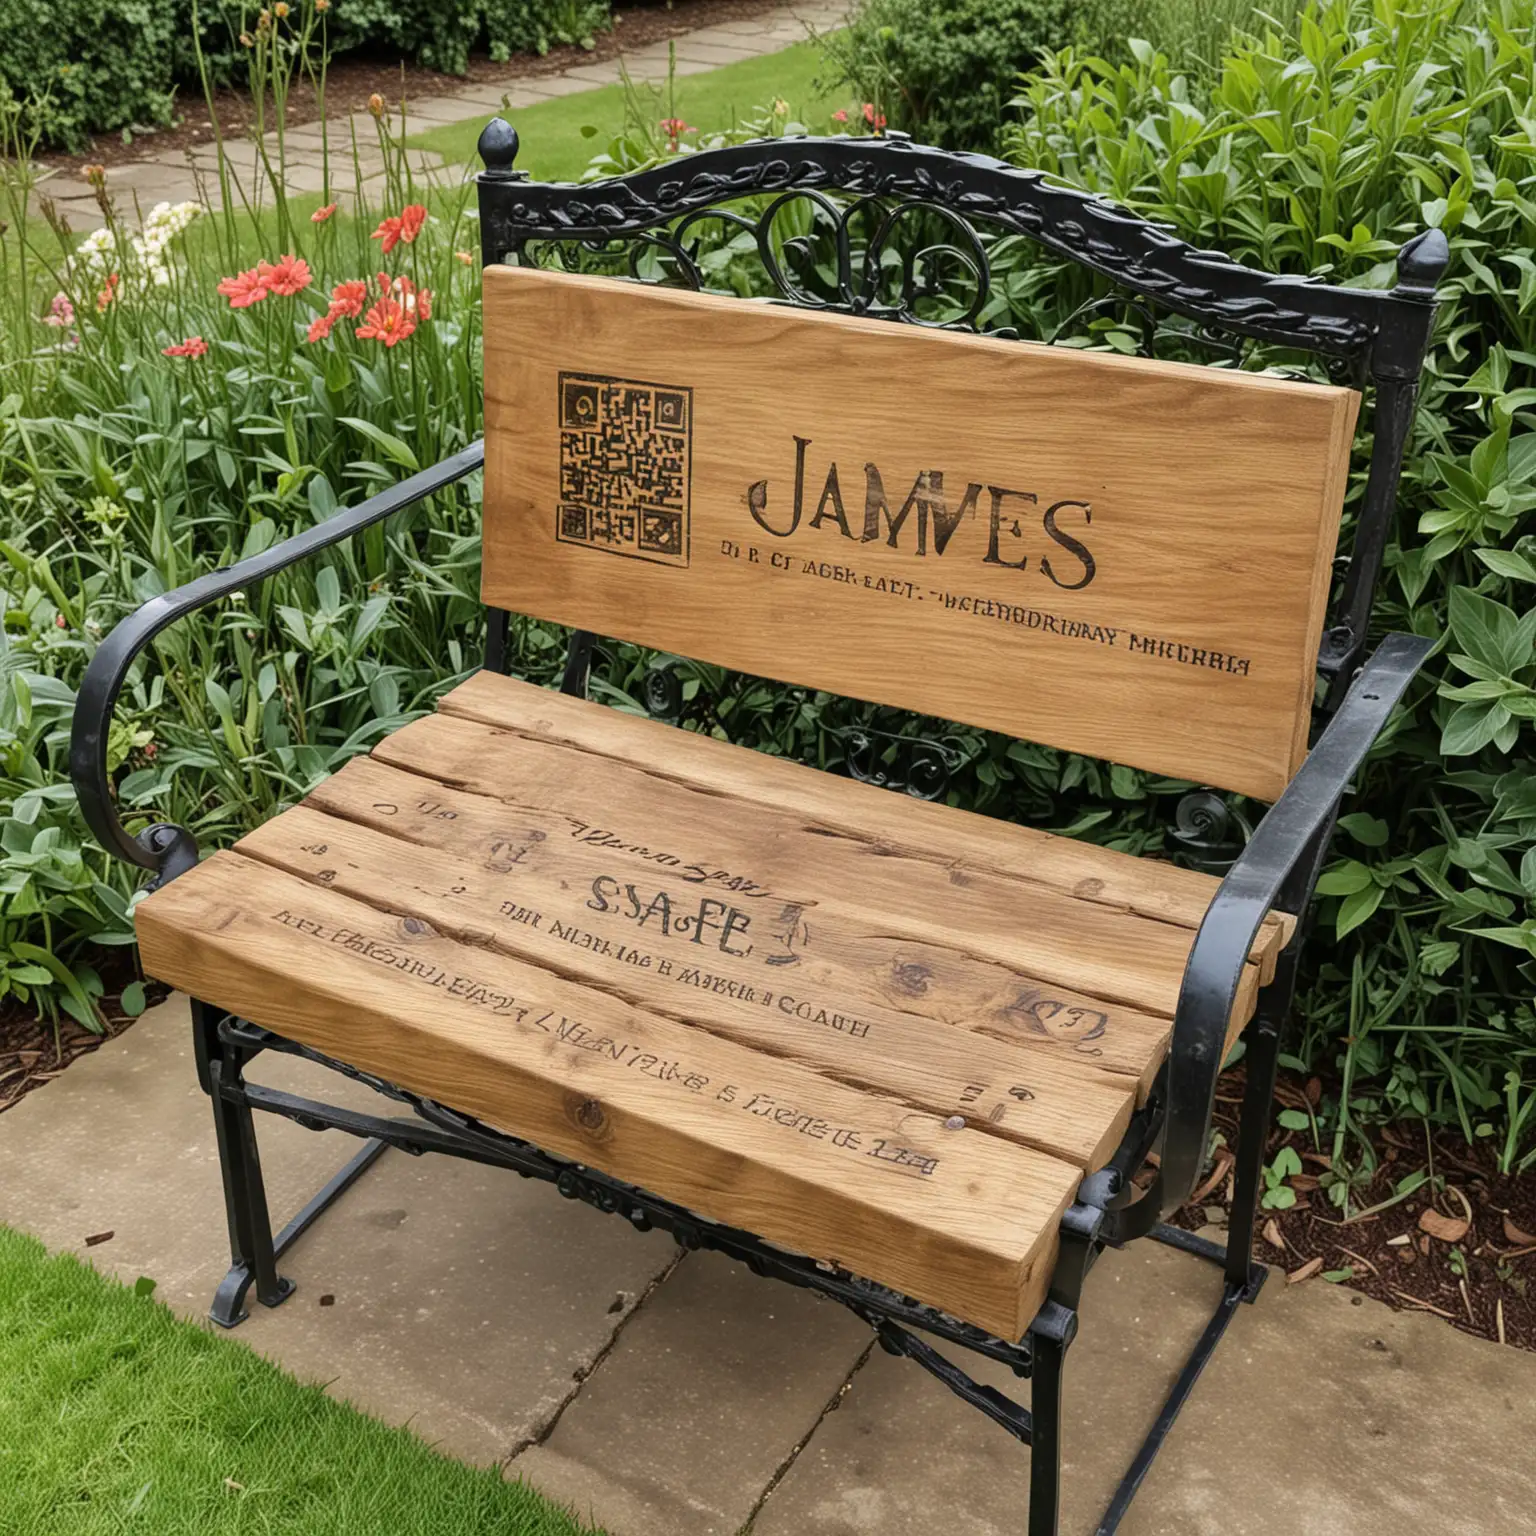 A wooden garden seat with wrought iron arms, in a lovely garden. On the back of the chair, is a rectangular metal plaque printed with the name - JAMES JOHNS - on it .  Next to the name on the back of the chair is a QR code.  Both the name and the QR code are side by side on the metal plaque, which is screwed into the back of the seat.
The seat of the chair, is just plain wood, 